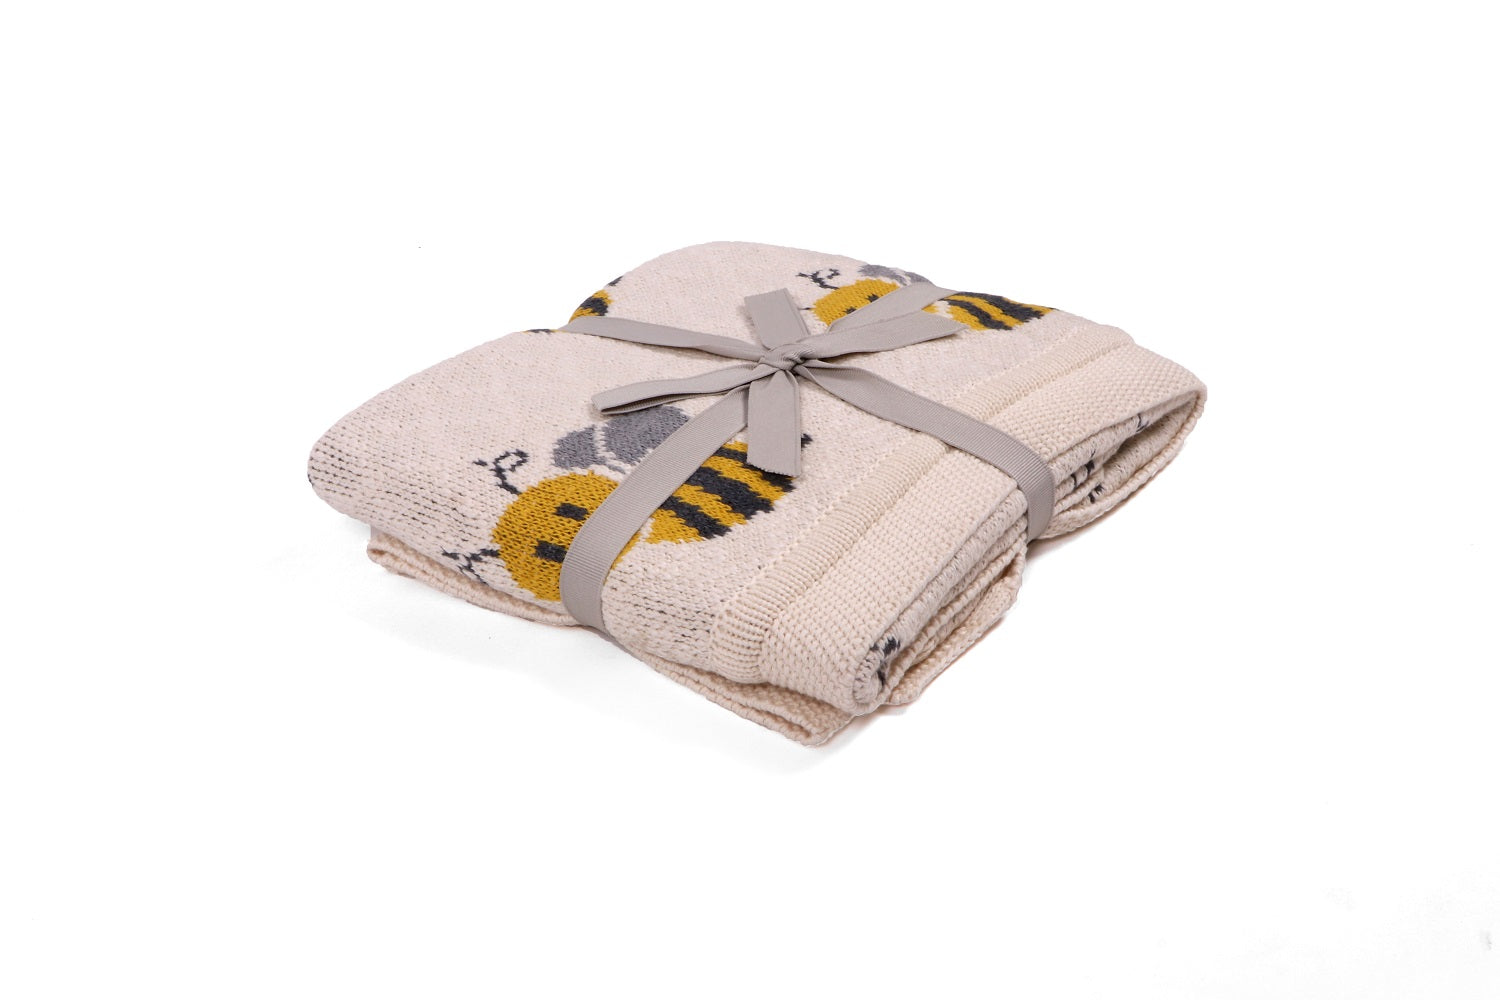 BUSY AS A BEE - Natural, Lt.Grey Melange, Black, Lt Camel Color Cotton Knitted AC Blanket for Baby / Infant / New Born for use in all Seasons - Coral Tree 